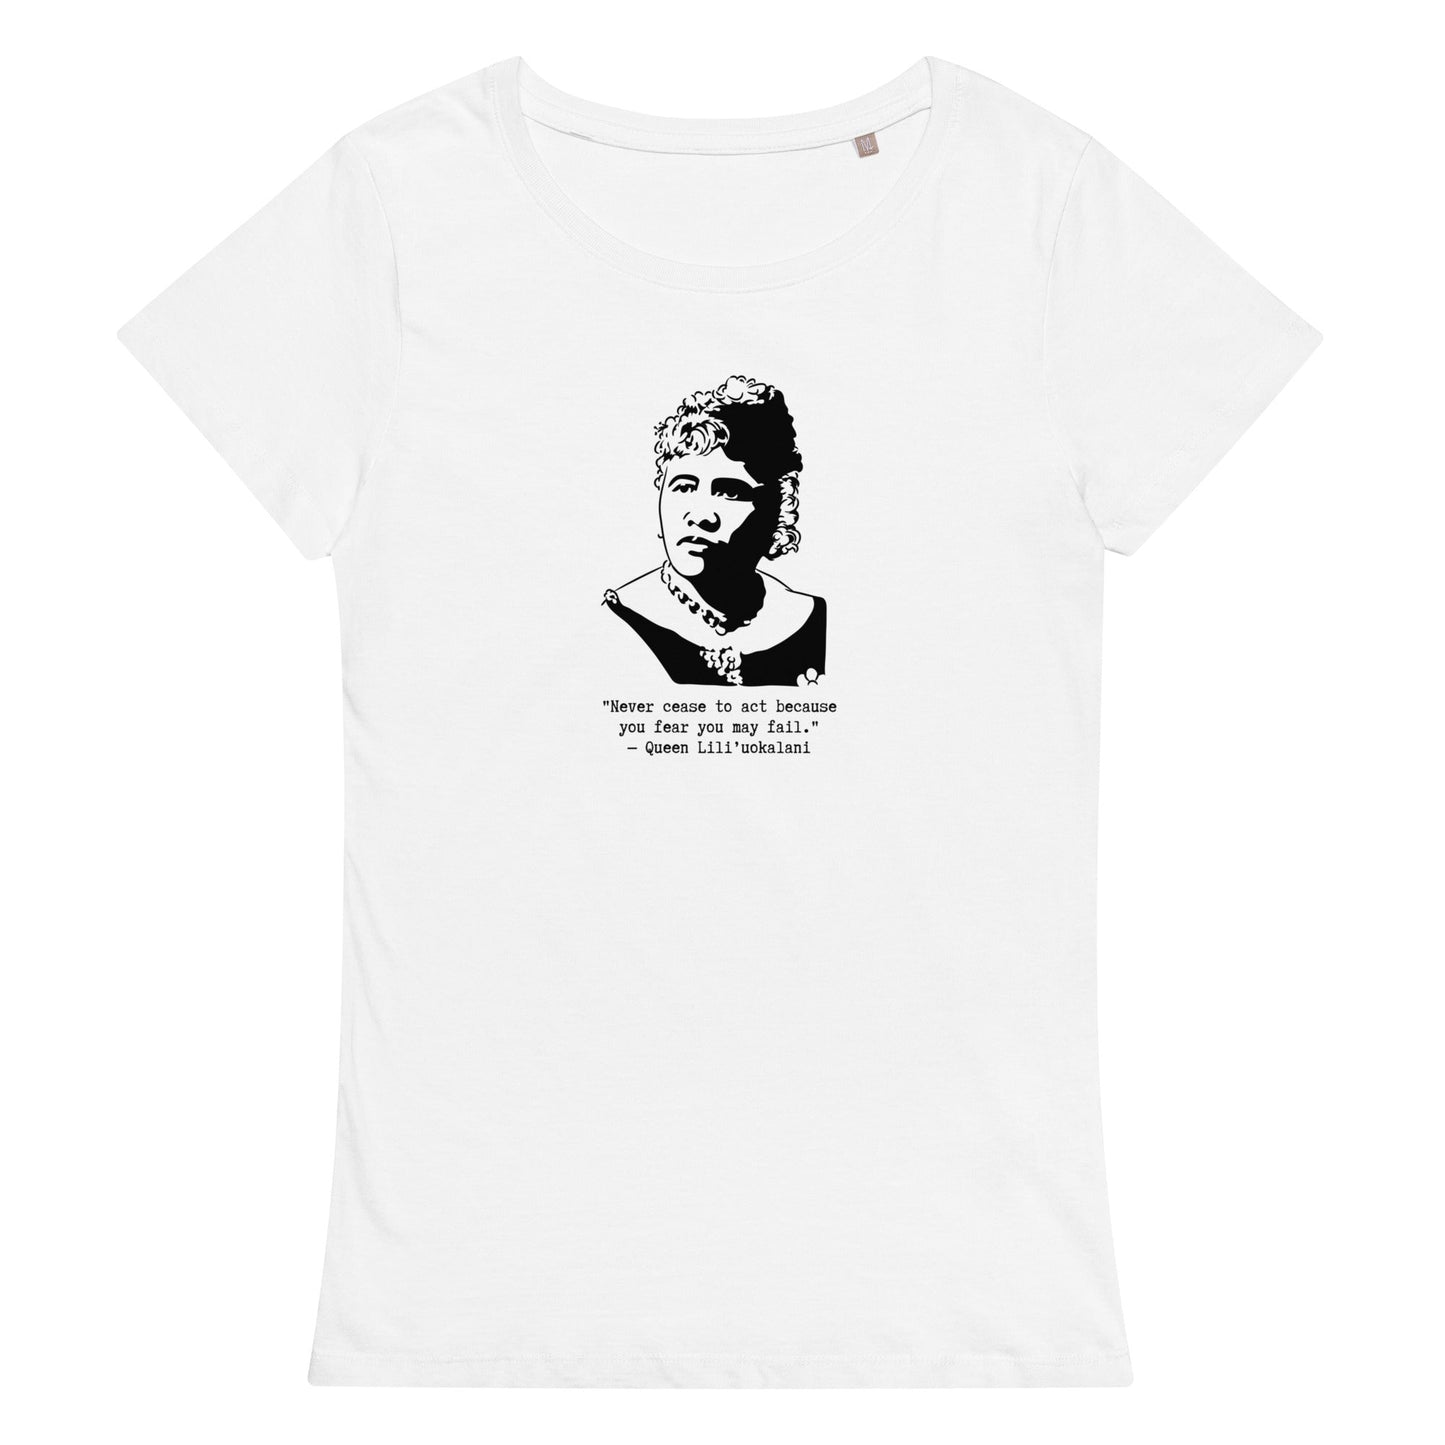 Queen Liliʻuokalani "Never cease to act because you fear you may fail" Organic T-shirt